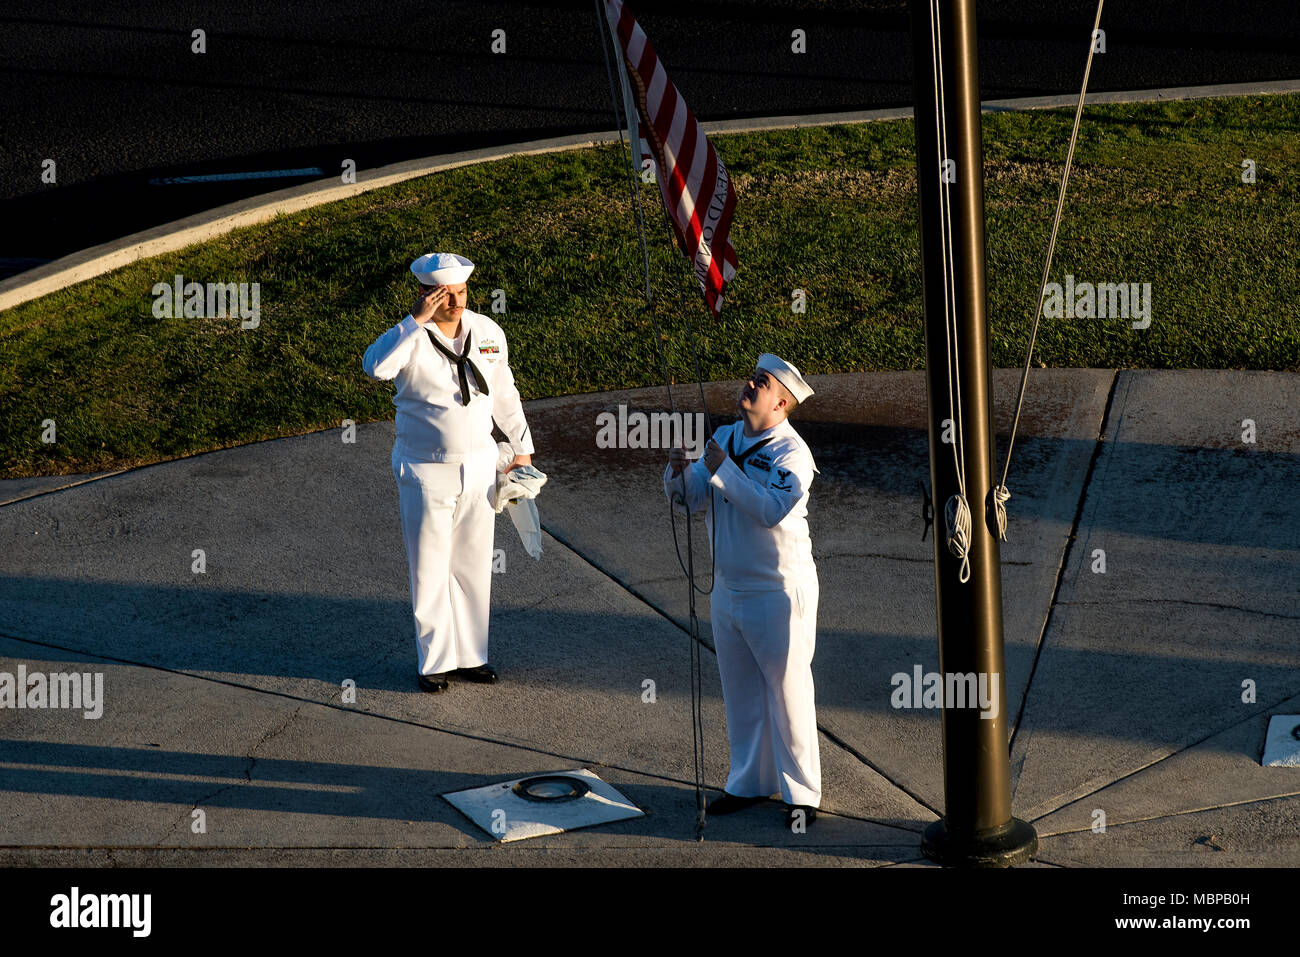 180101-N-QE566-001  PEARL HARBOR - (Jan. 1, 2018) (left to right) Culinary Specialist 2nd Class Gerado Taddei and Yeoman 2nd Class Andrew Thompson fly the "First Navy Jack" to start the New Year on Joint Base Pearl Harbor-Hickam. Rear Adm. Brian Fort, commander, Navy Region Hawaii and Naval Surface Group Middle Pacific, directed the base headquarters building to fly the "First Navy Jack" throughout 2018 to honor the 17 shipmates we lost on USS Fitzgerald (DDG-62) and USS John S. McCain (DDG-56)  and as a reminder that our warfighting edge is not only back but renewed and forged with purpose. ( Stock Photo